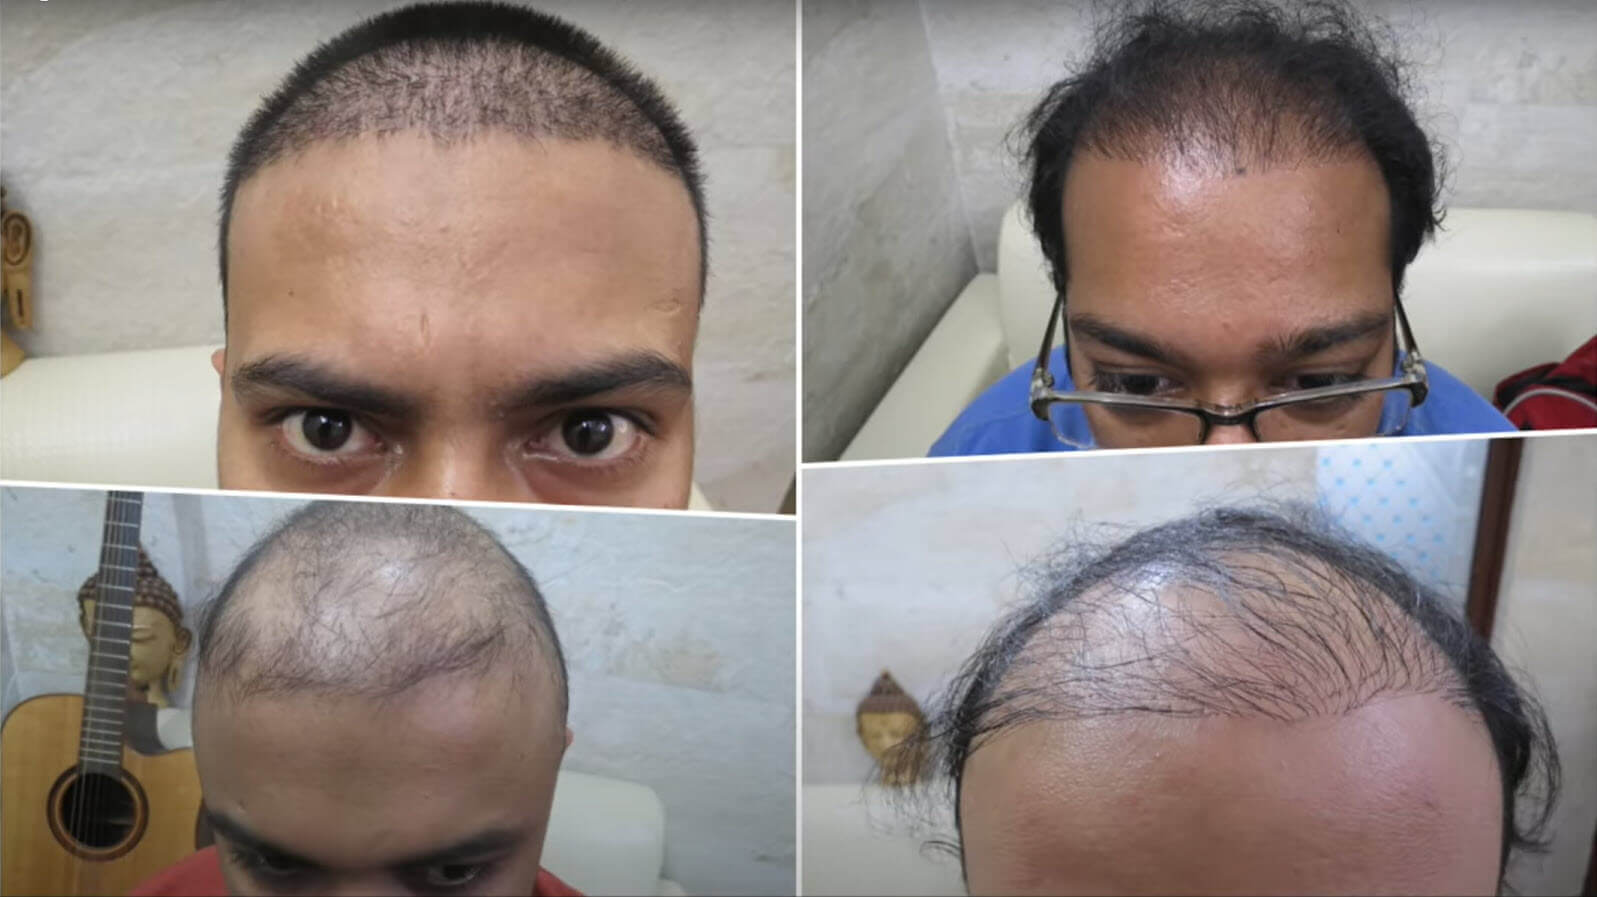 Pros and Cons of a Surgical Hair Transplant